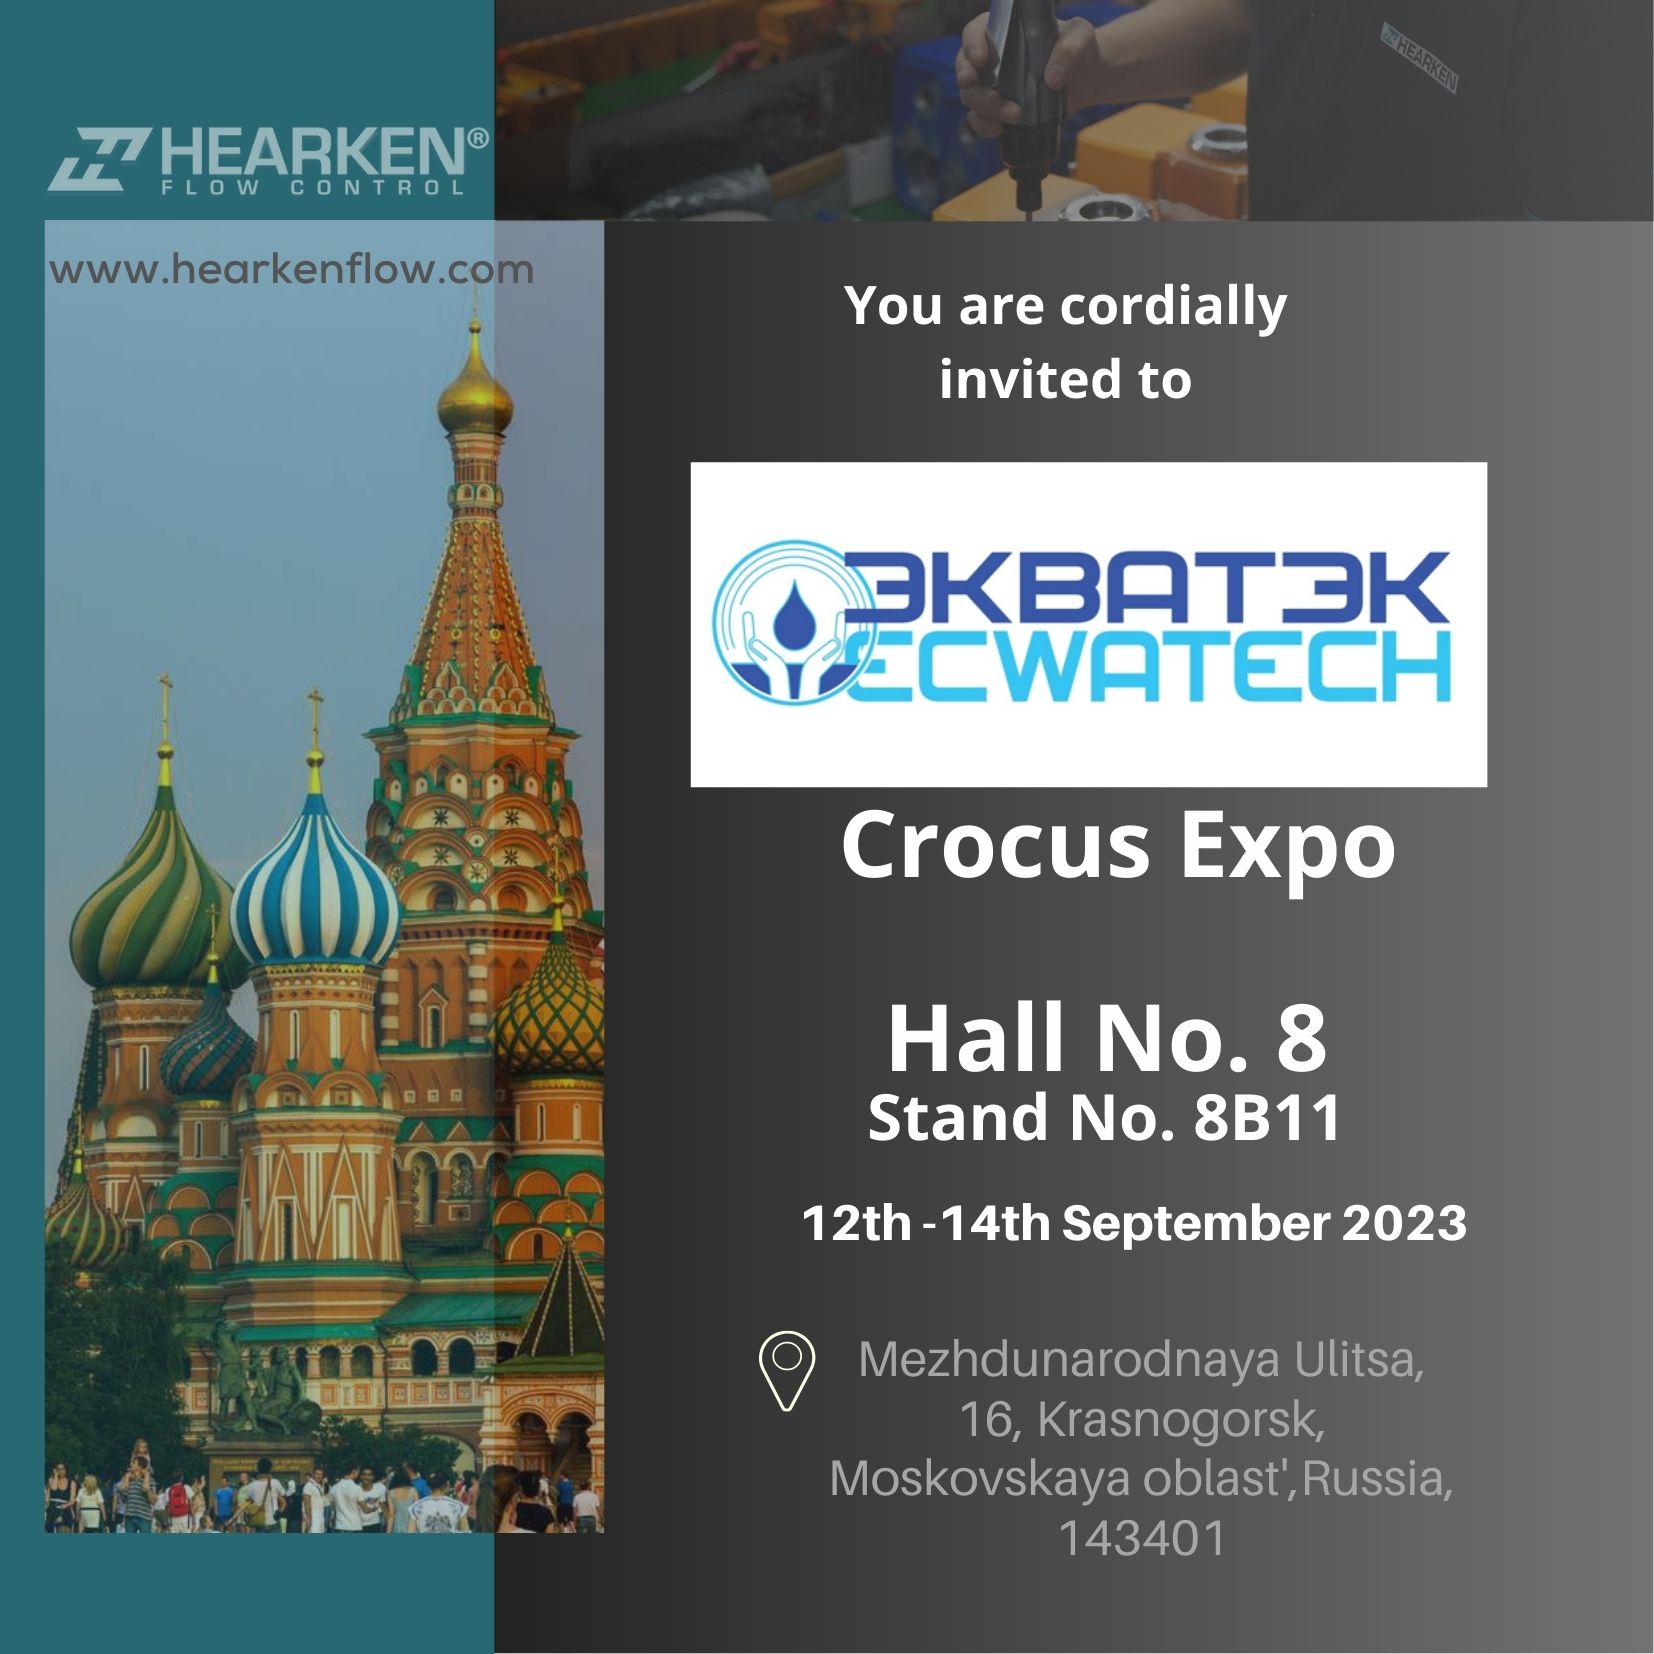 Participate in ECWATECH Exhibition in Moscow, Russia, from 12th~14th September 2023.